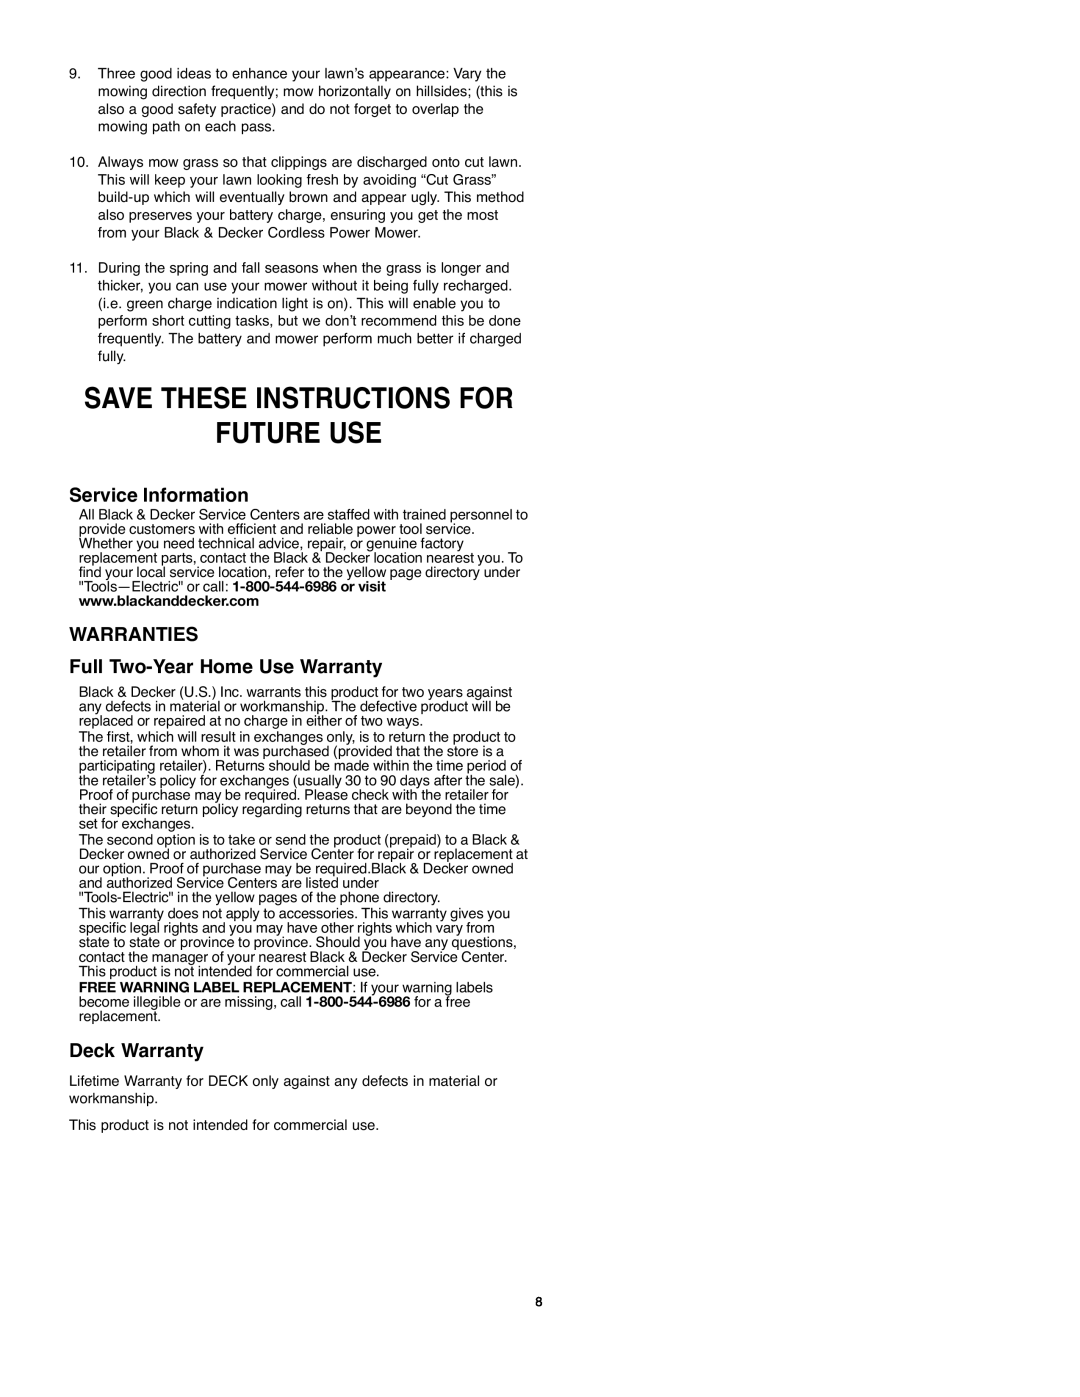 Black & Decker 90541667 instruction manual Save These Instructions For Future Use, Service Information, Deck Warranty 